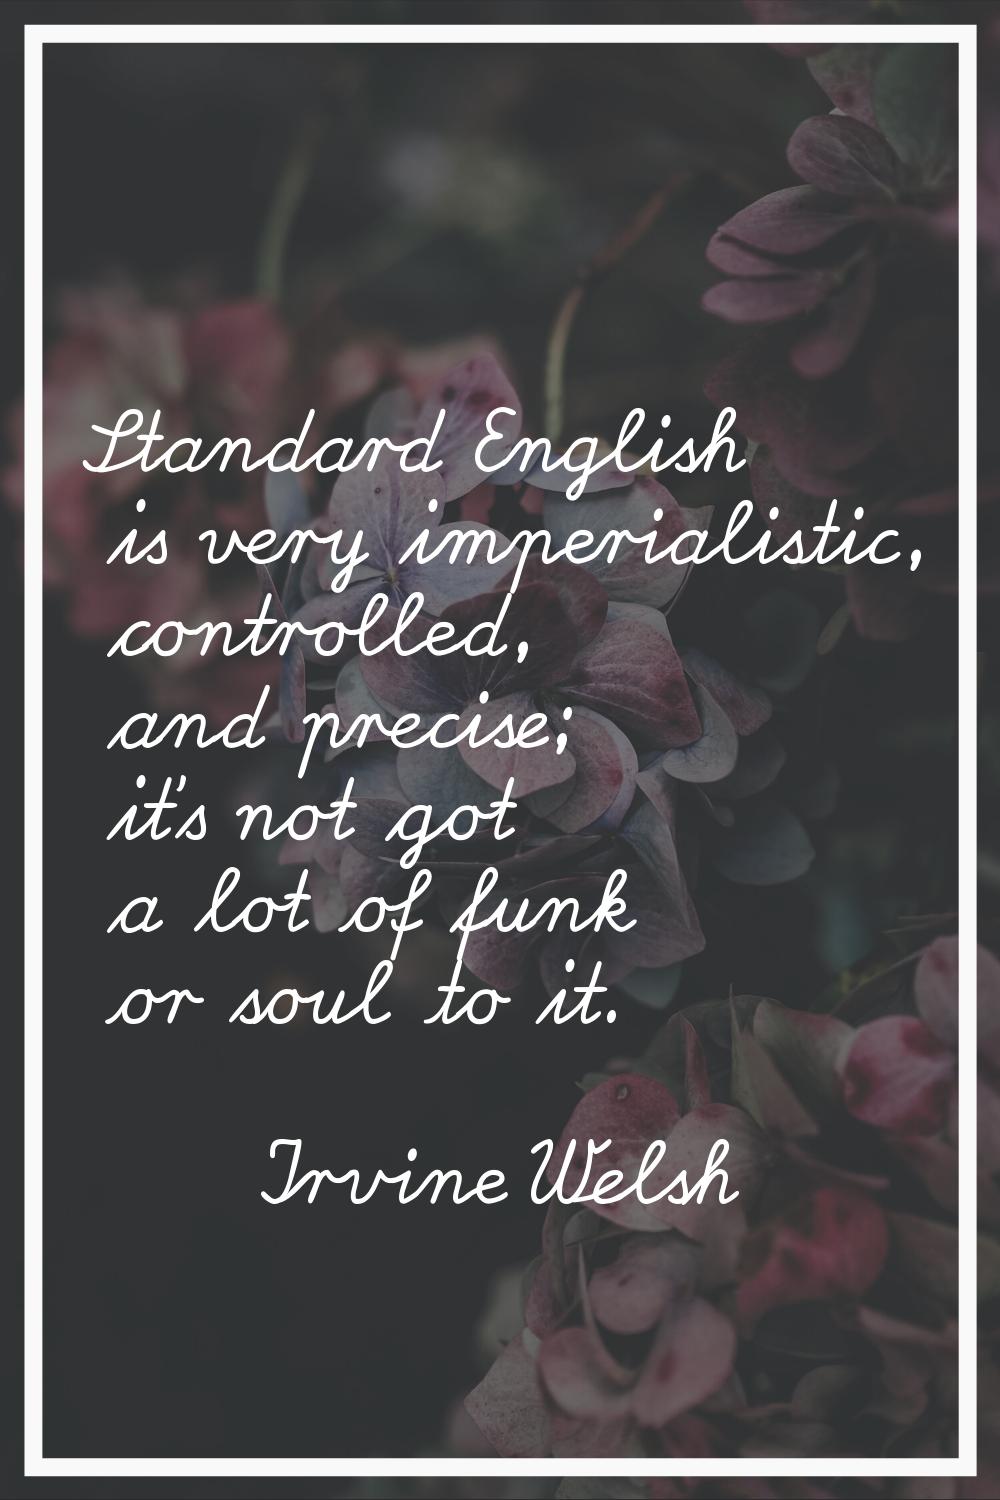 Standard English is very imperialistic, controlled, and precise; it's not got a lot of funk or soul